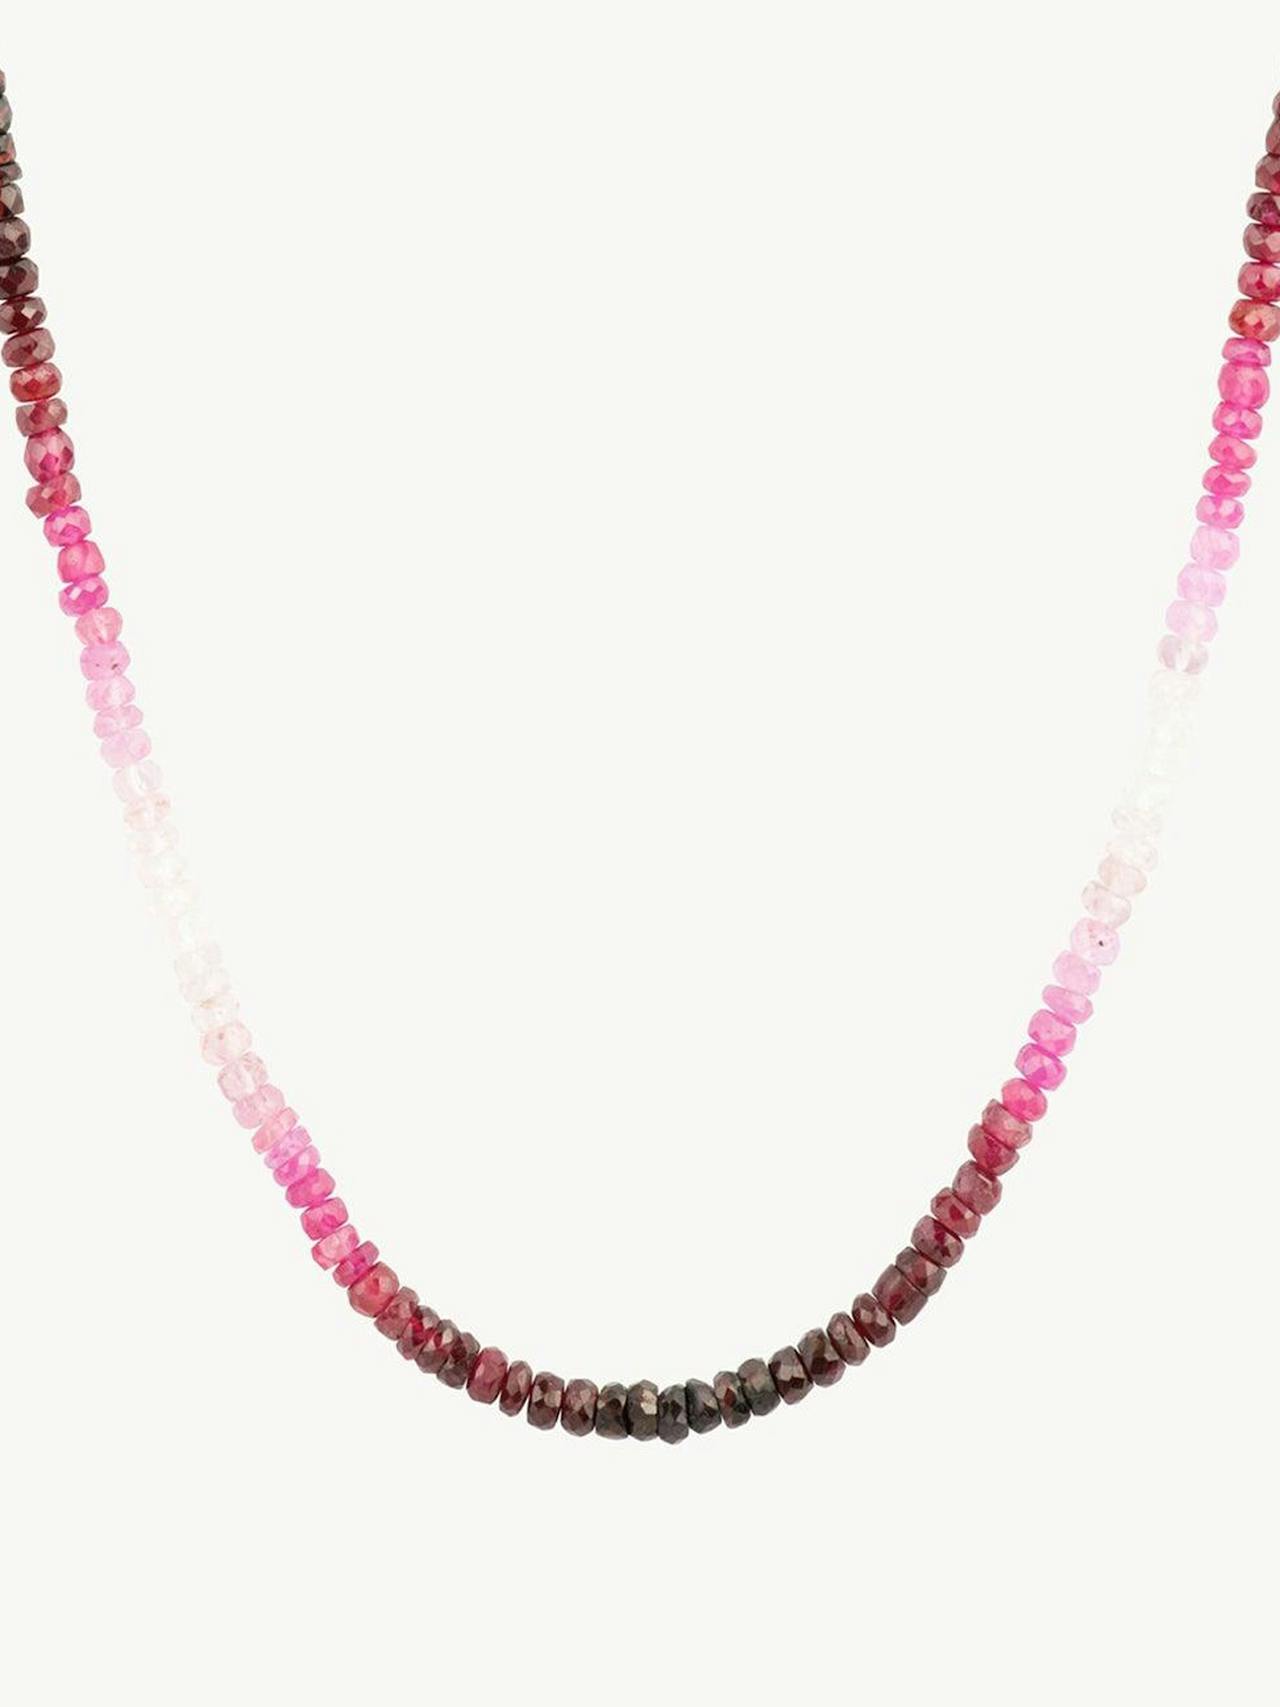 Graduated ruby necklace